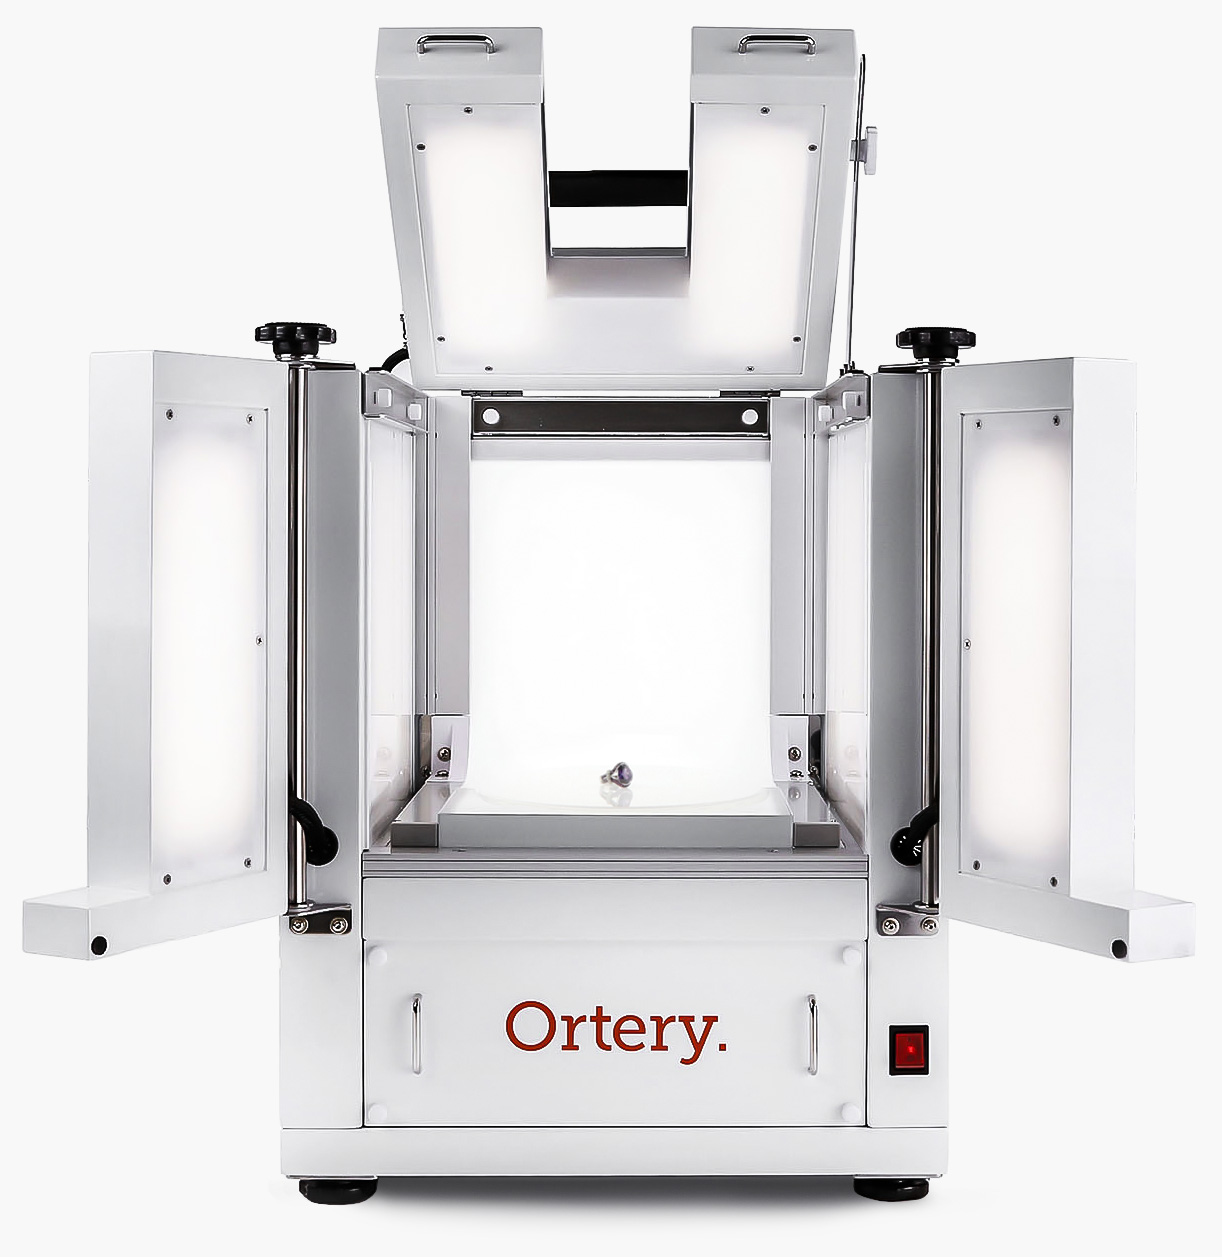 Ortery Photobench 80 is a 360 jewelry photography solution with software controlled LED lighting and turntable for taking jewelry product photos on a pure-white or transparent background.